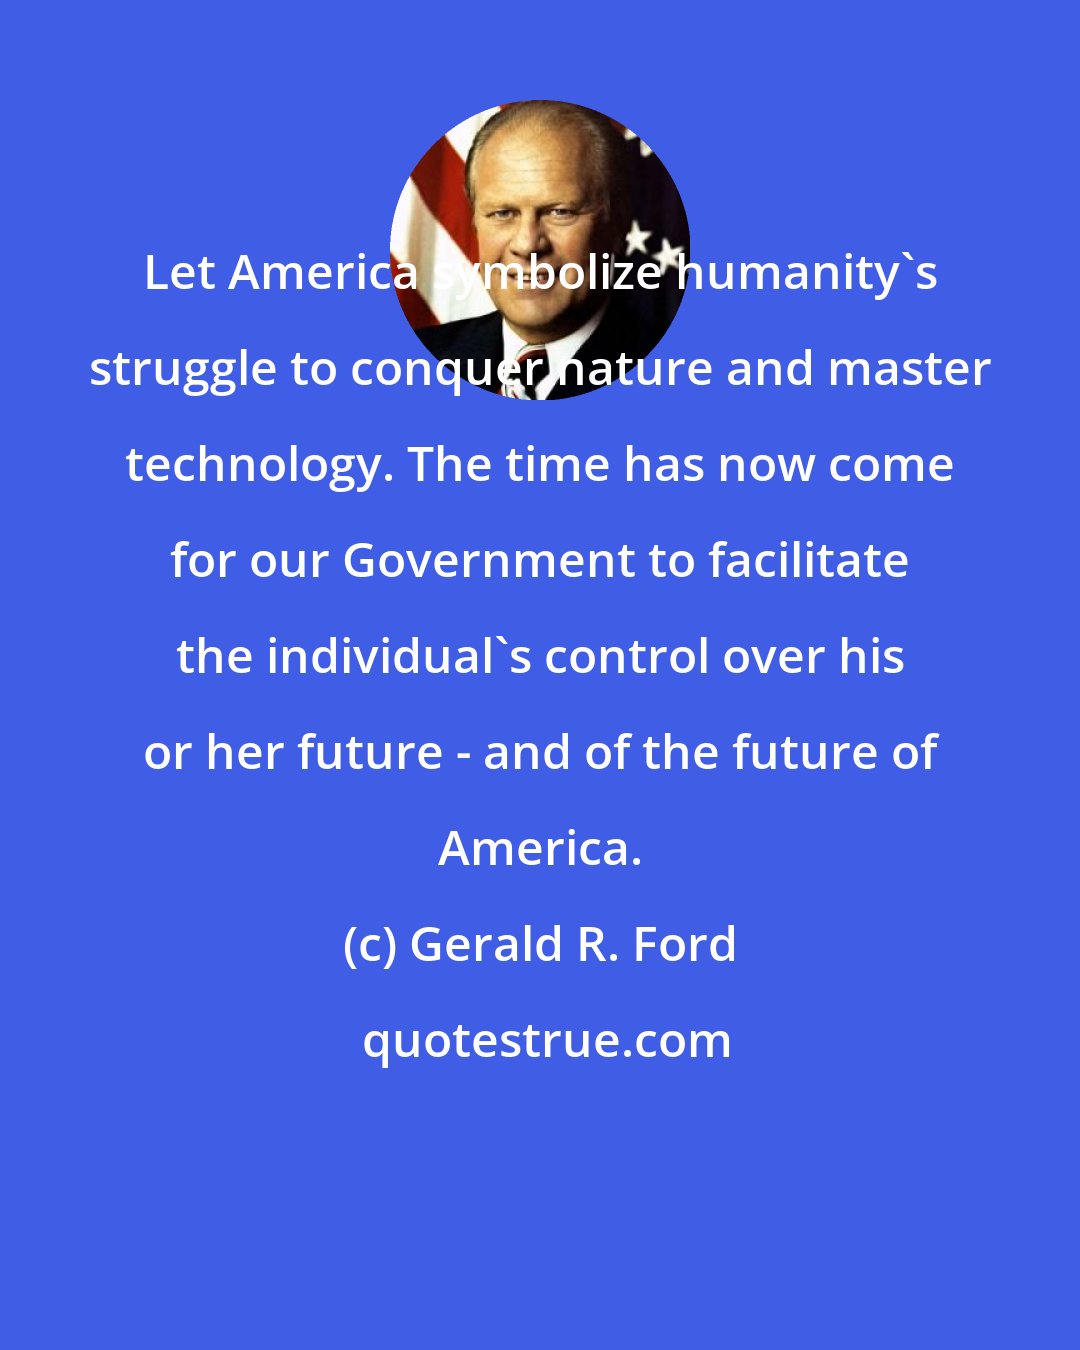 Gerald R. Ford: Let America symbolize humanity's struggle to conquer nature and master technology. The time has now come for our Government to facilitate the individual's control over his or her future - and of the future of America.